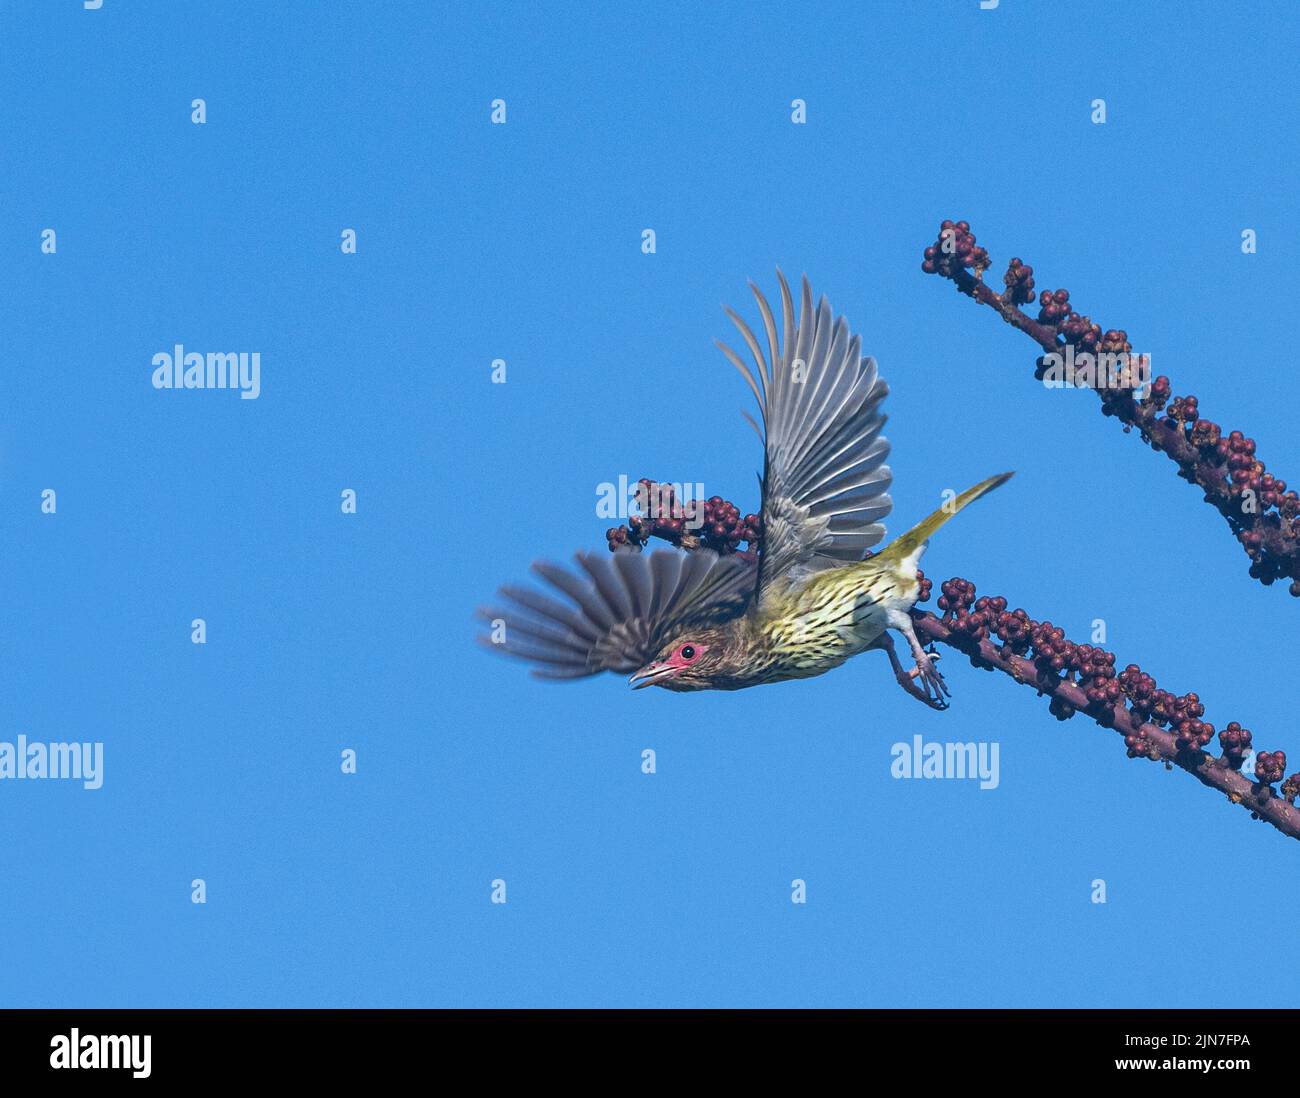 Australasian Figbird (Sphecotheres flaviventris) taking off from a branch with berries, Mungulla Station, Queensland, QLD, Australia Stock Photo